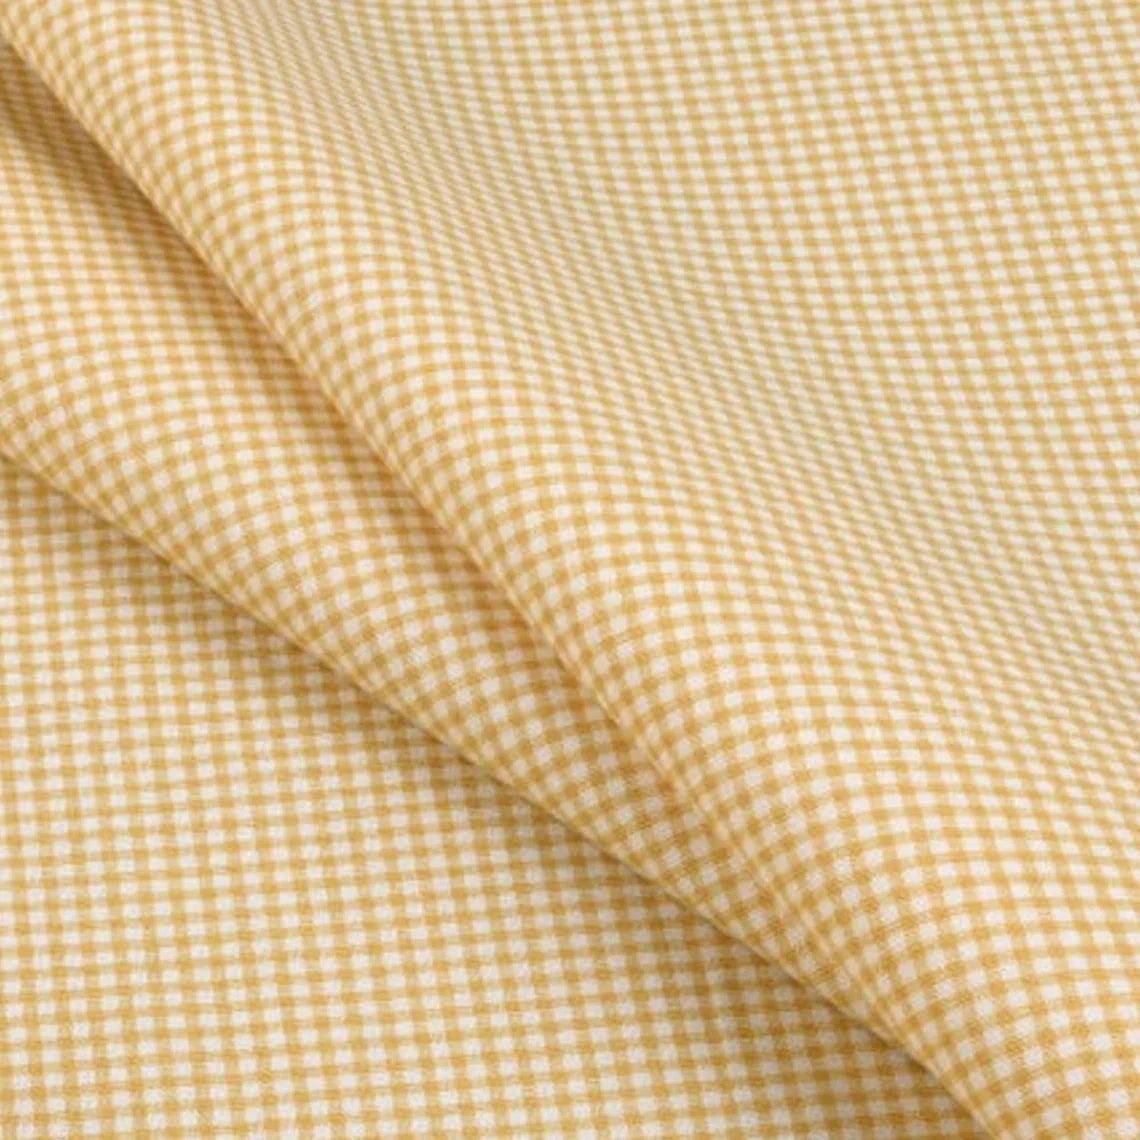 Scalloped Valance in Farmhouse Barley Yellow Gold Gingham Check